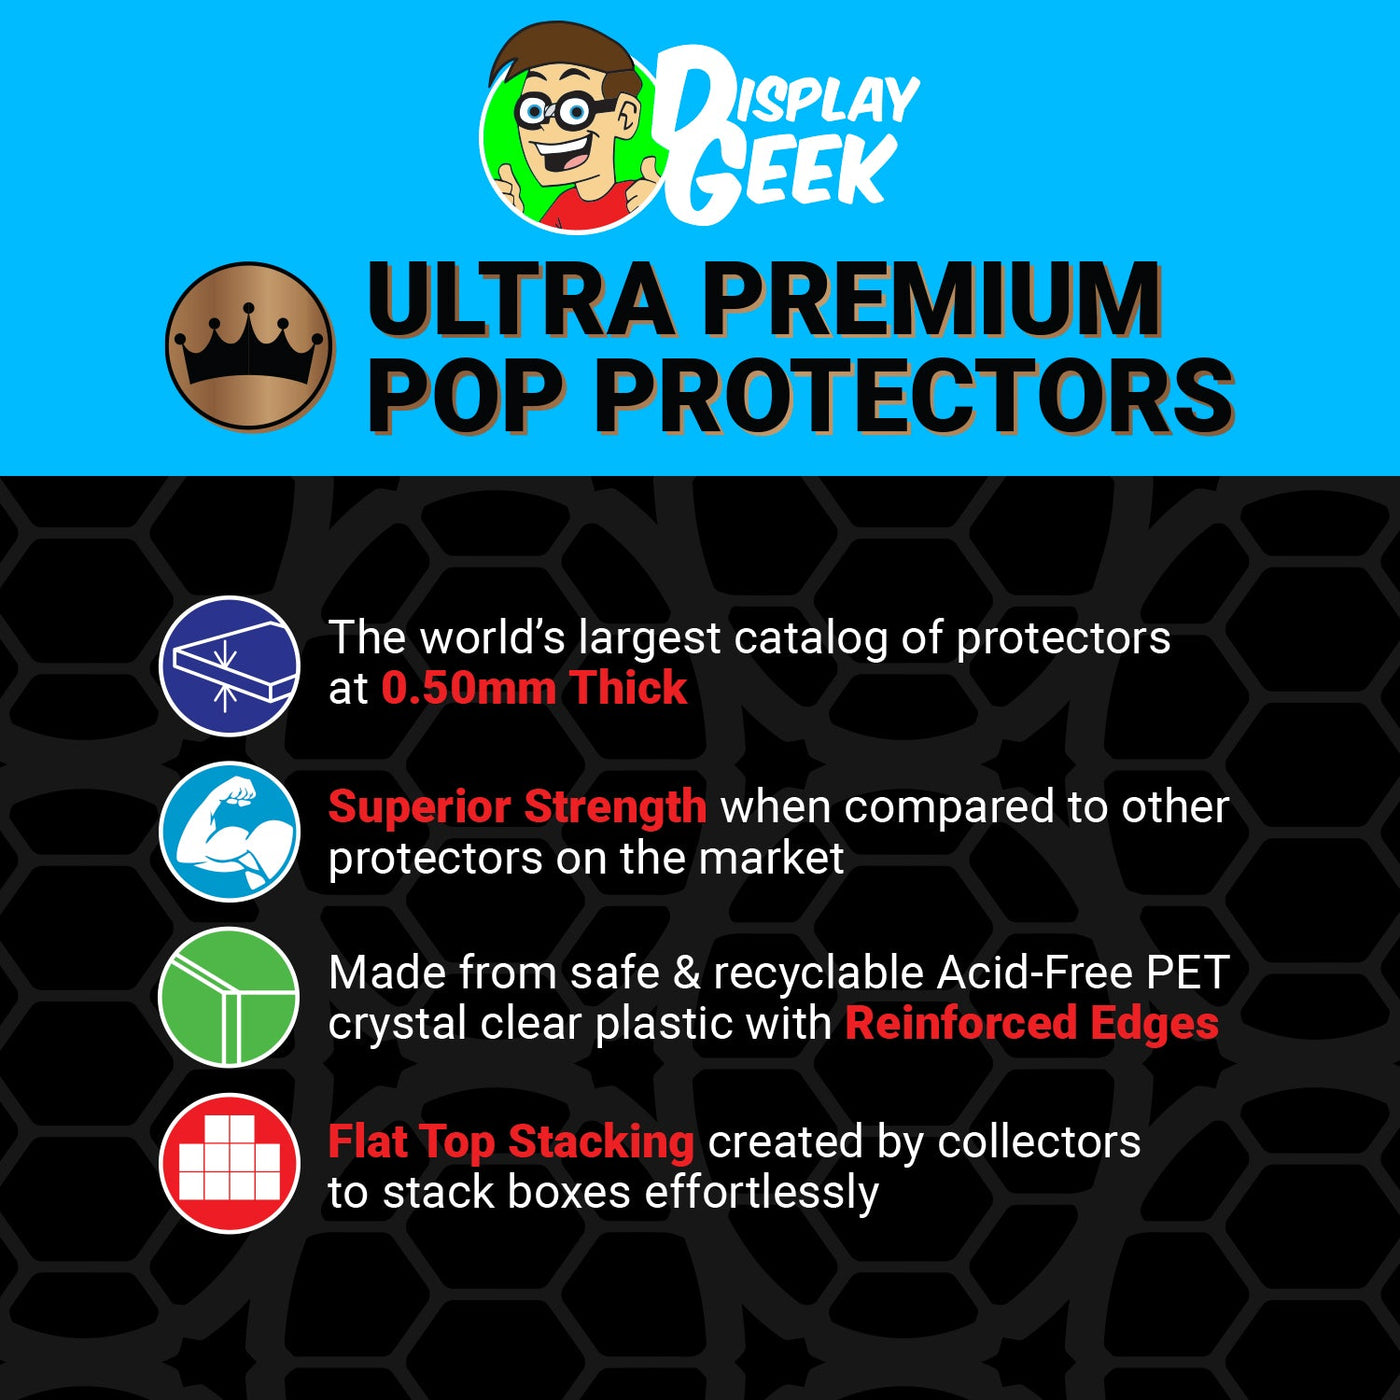 Pop Protector for Freddy Funko as Skeletor SDCC LE 100 on The Protector Guide App by Display Geek